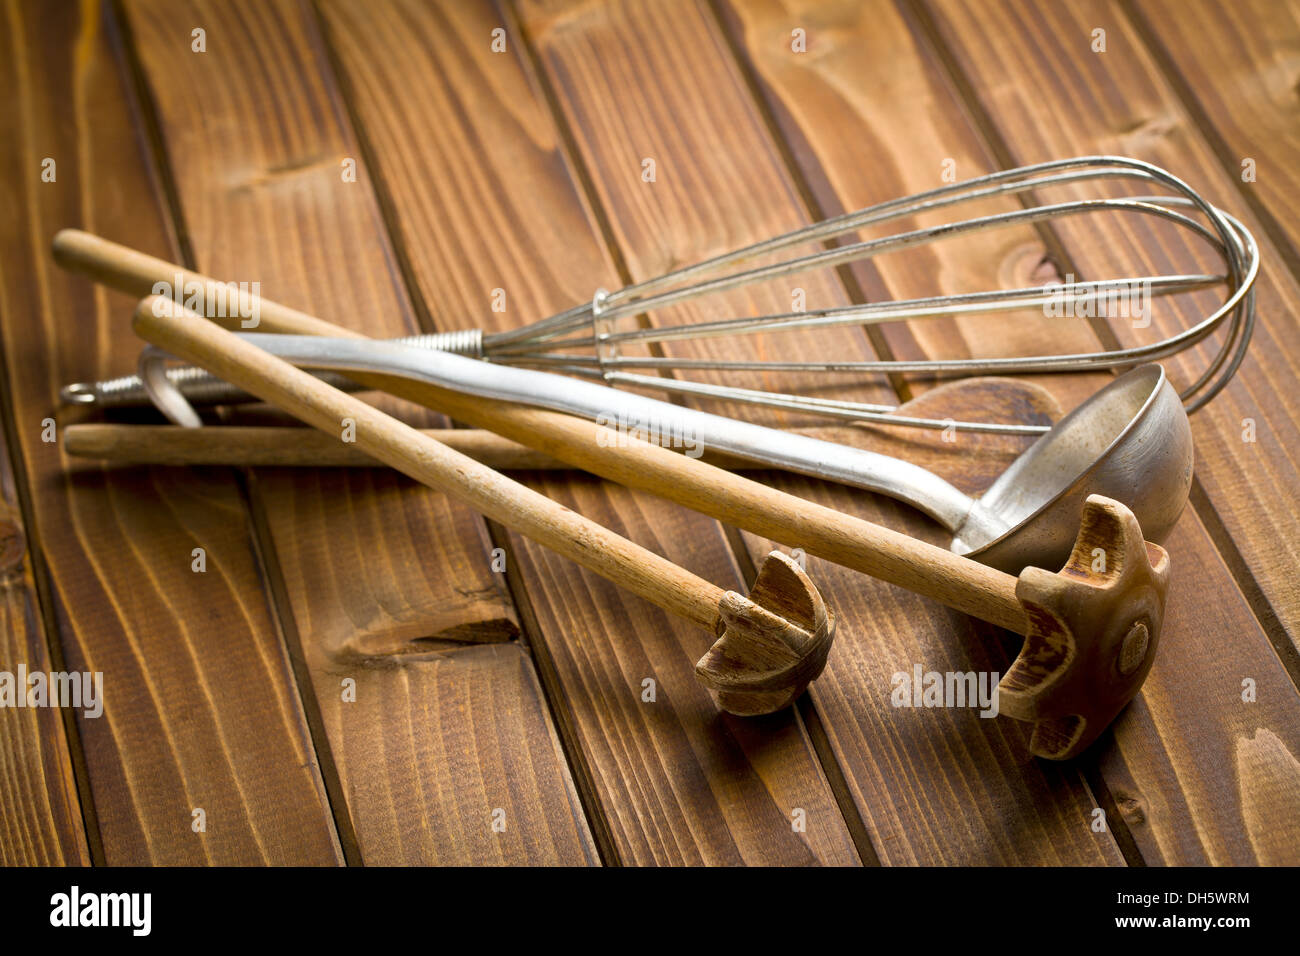 old kitchenware on wooden table Stock Photo